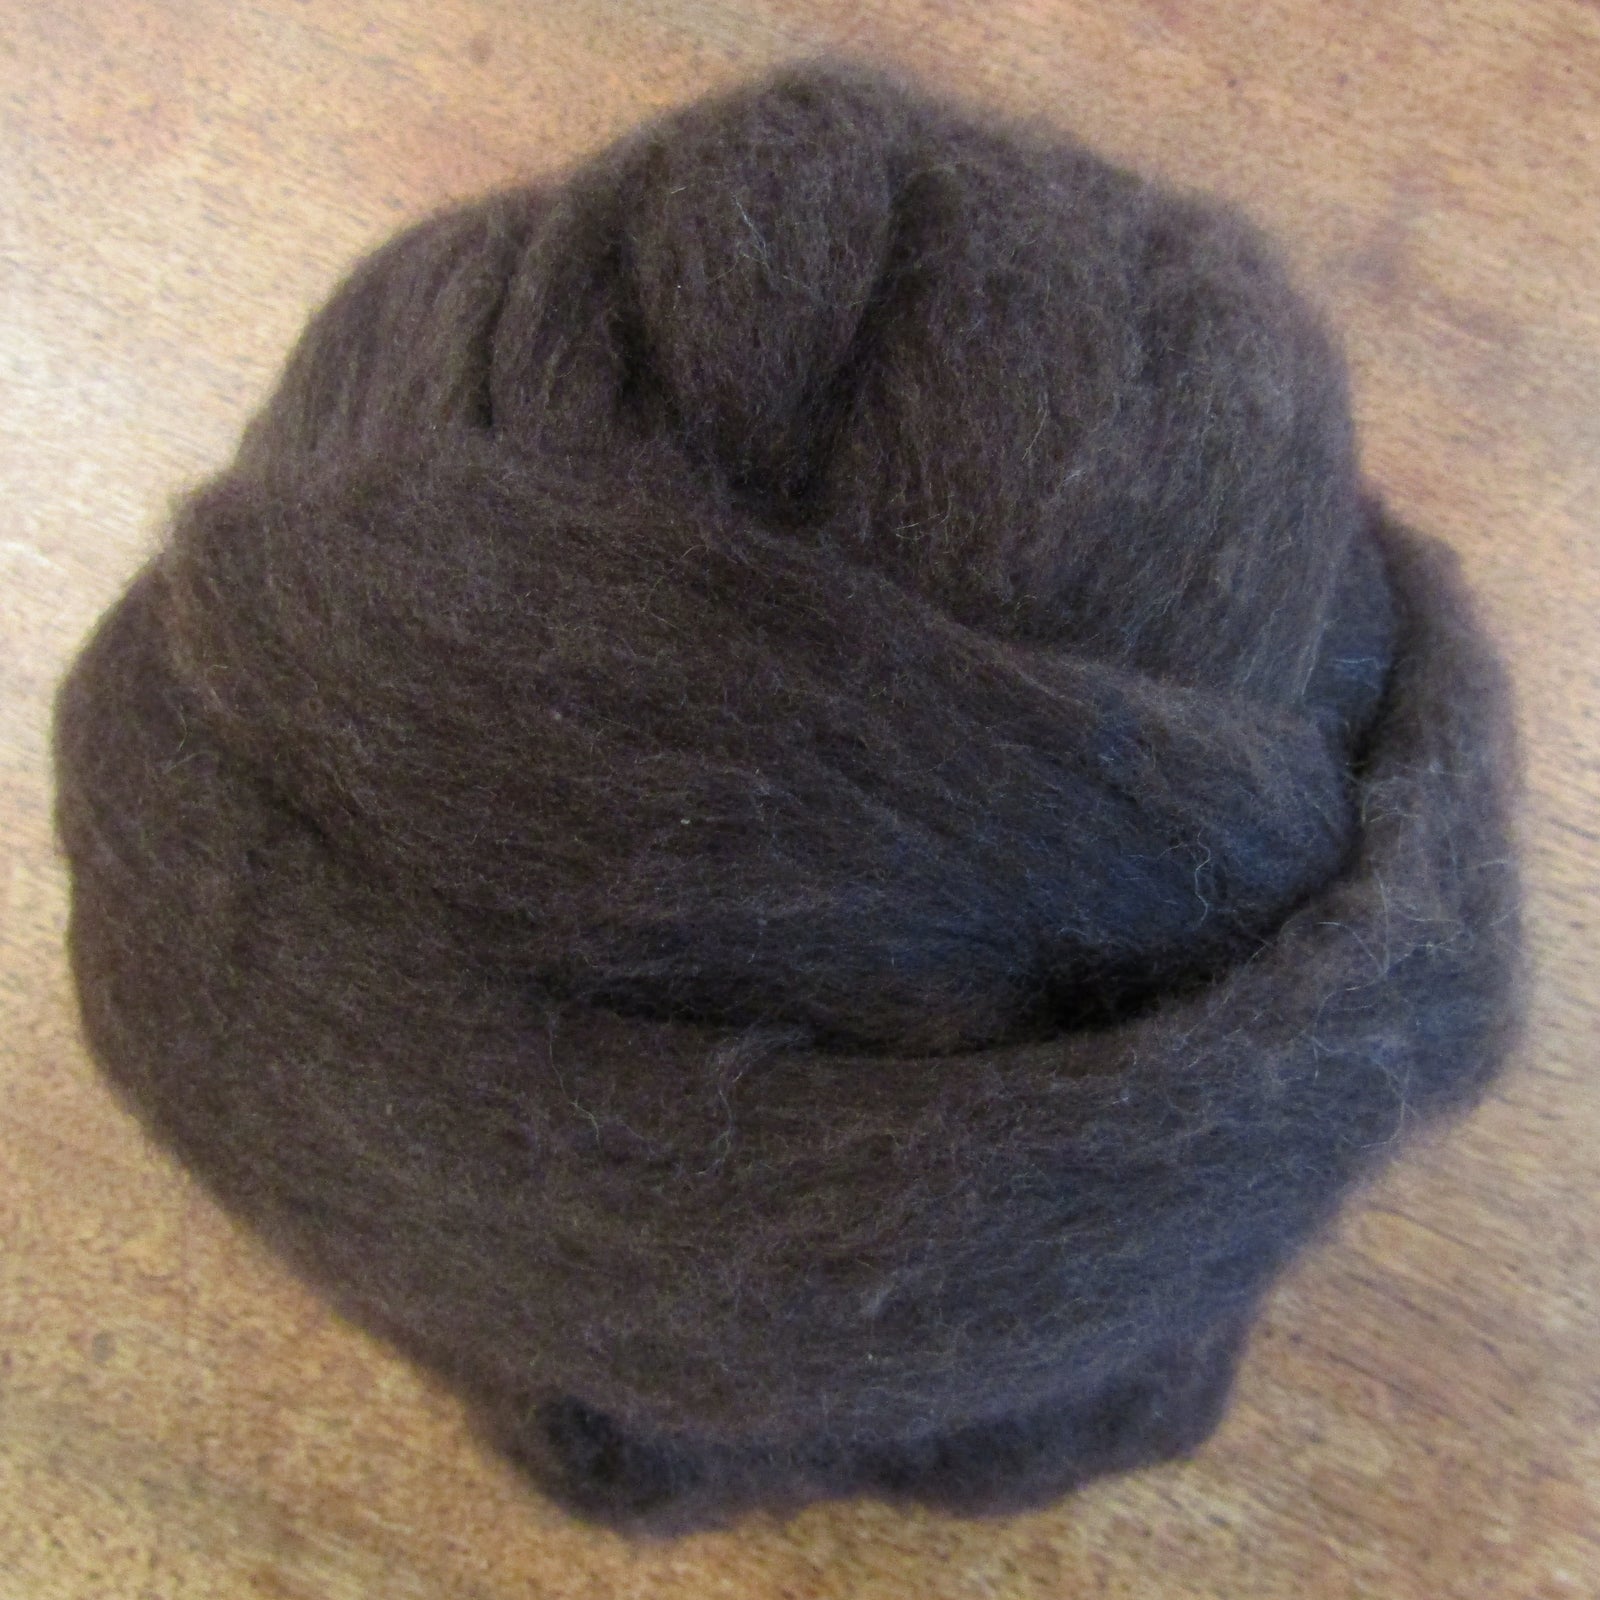 Dehaired Yak Top - Undyed